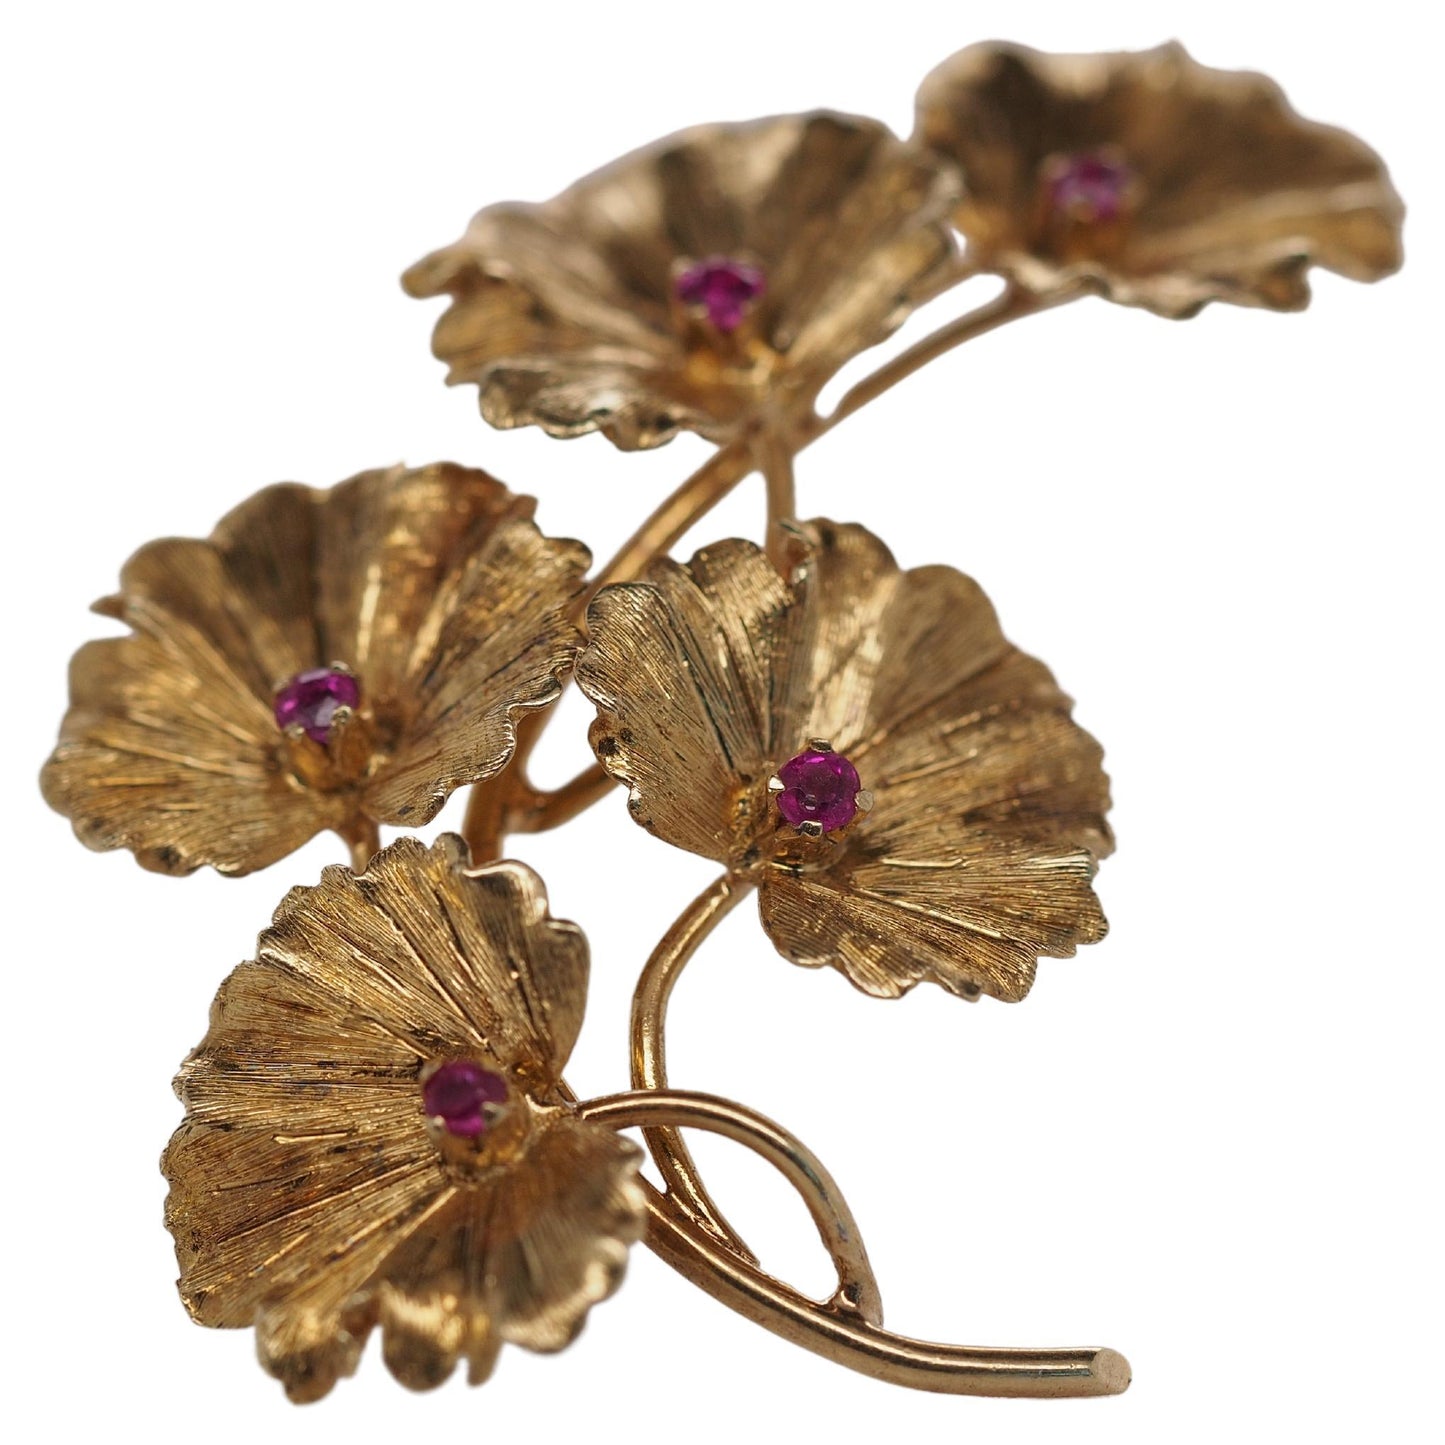 Smithworks Estate Jewelry 18K Yellow Gold Flower Pin with